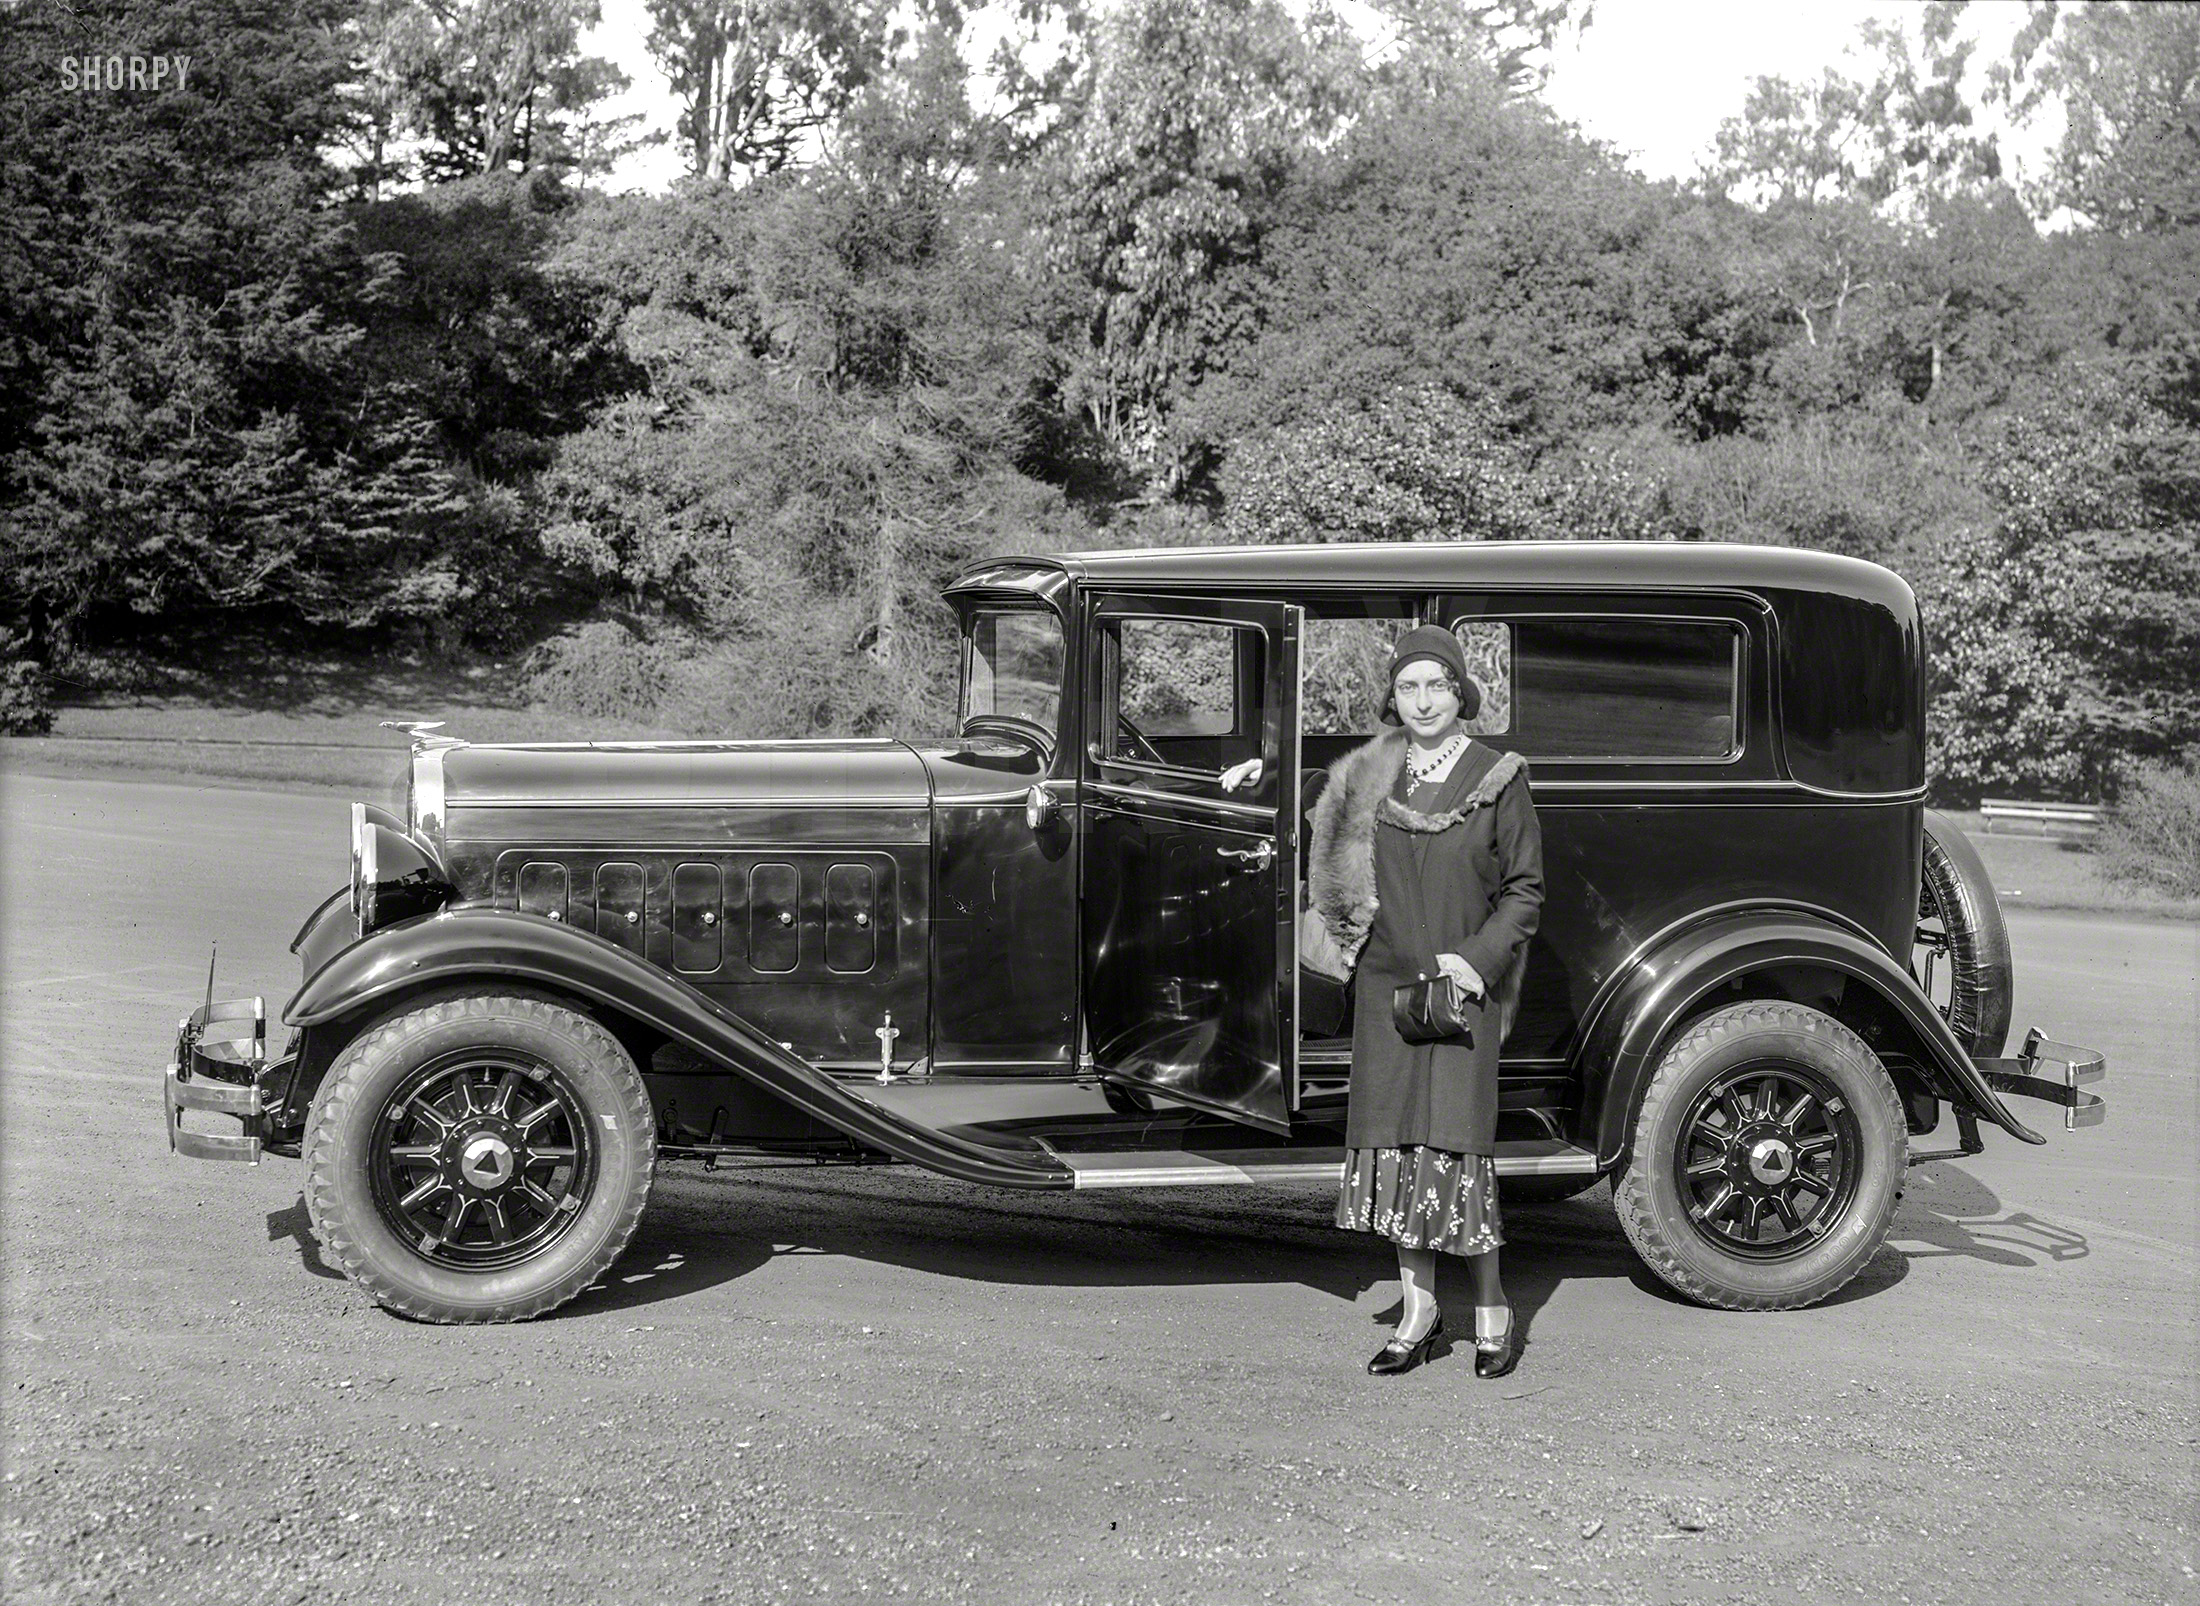 San Francisco, 1931. "Hudson sedan at Golden Gate Park." Perfect accessory for dark clothes or dark moods. 5x7 glass negative by Chris Helin. View full size.